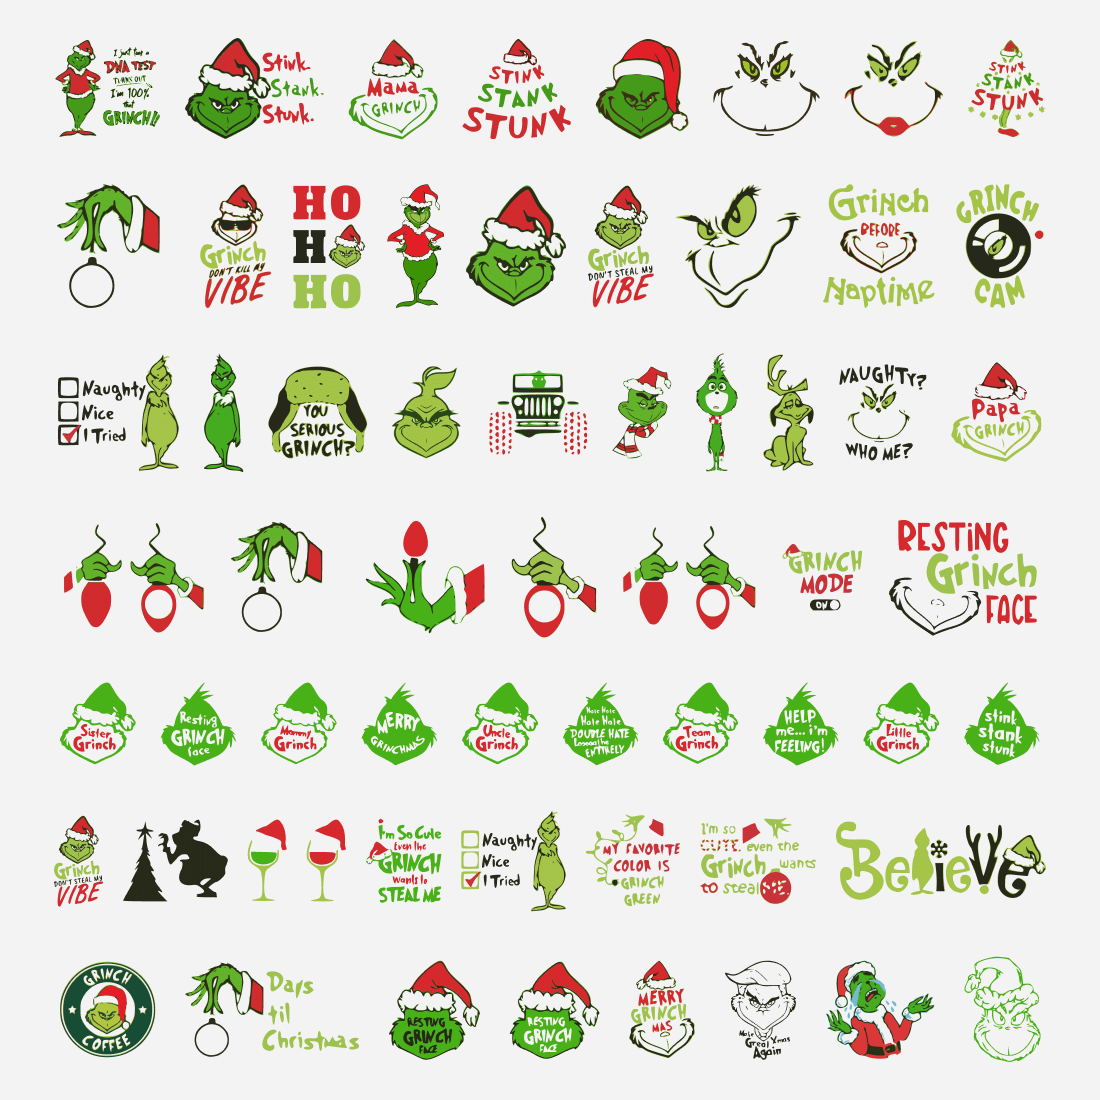 Different moods on the Grinch's face.